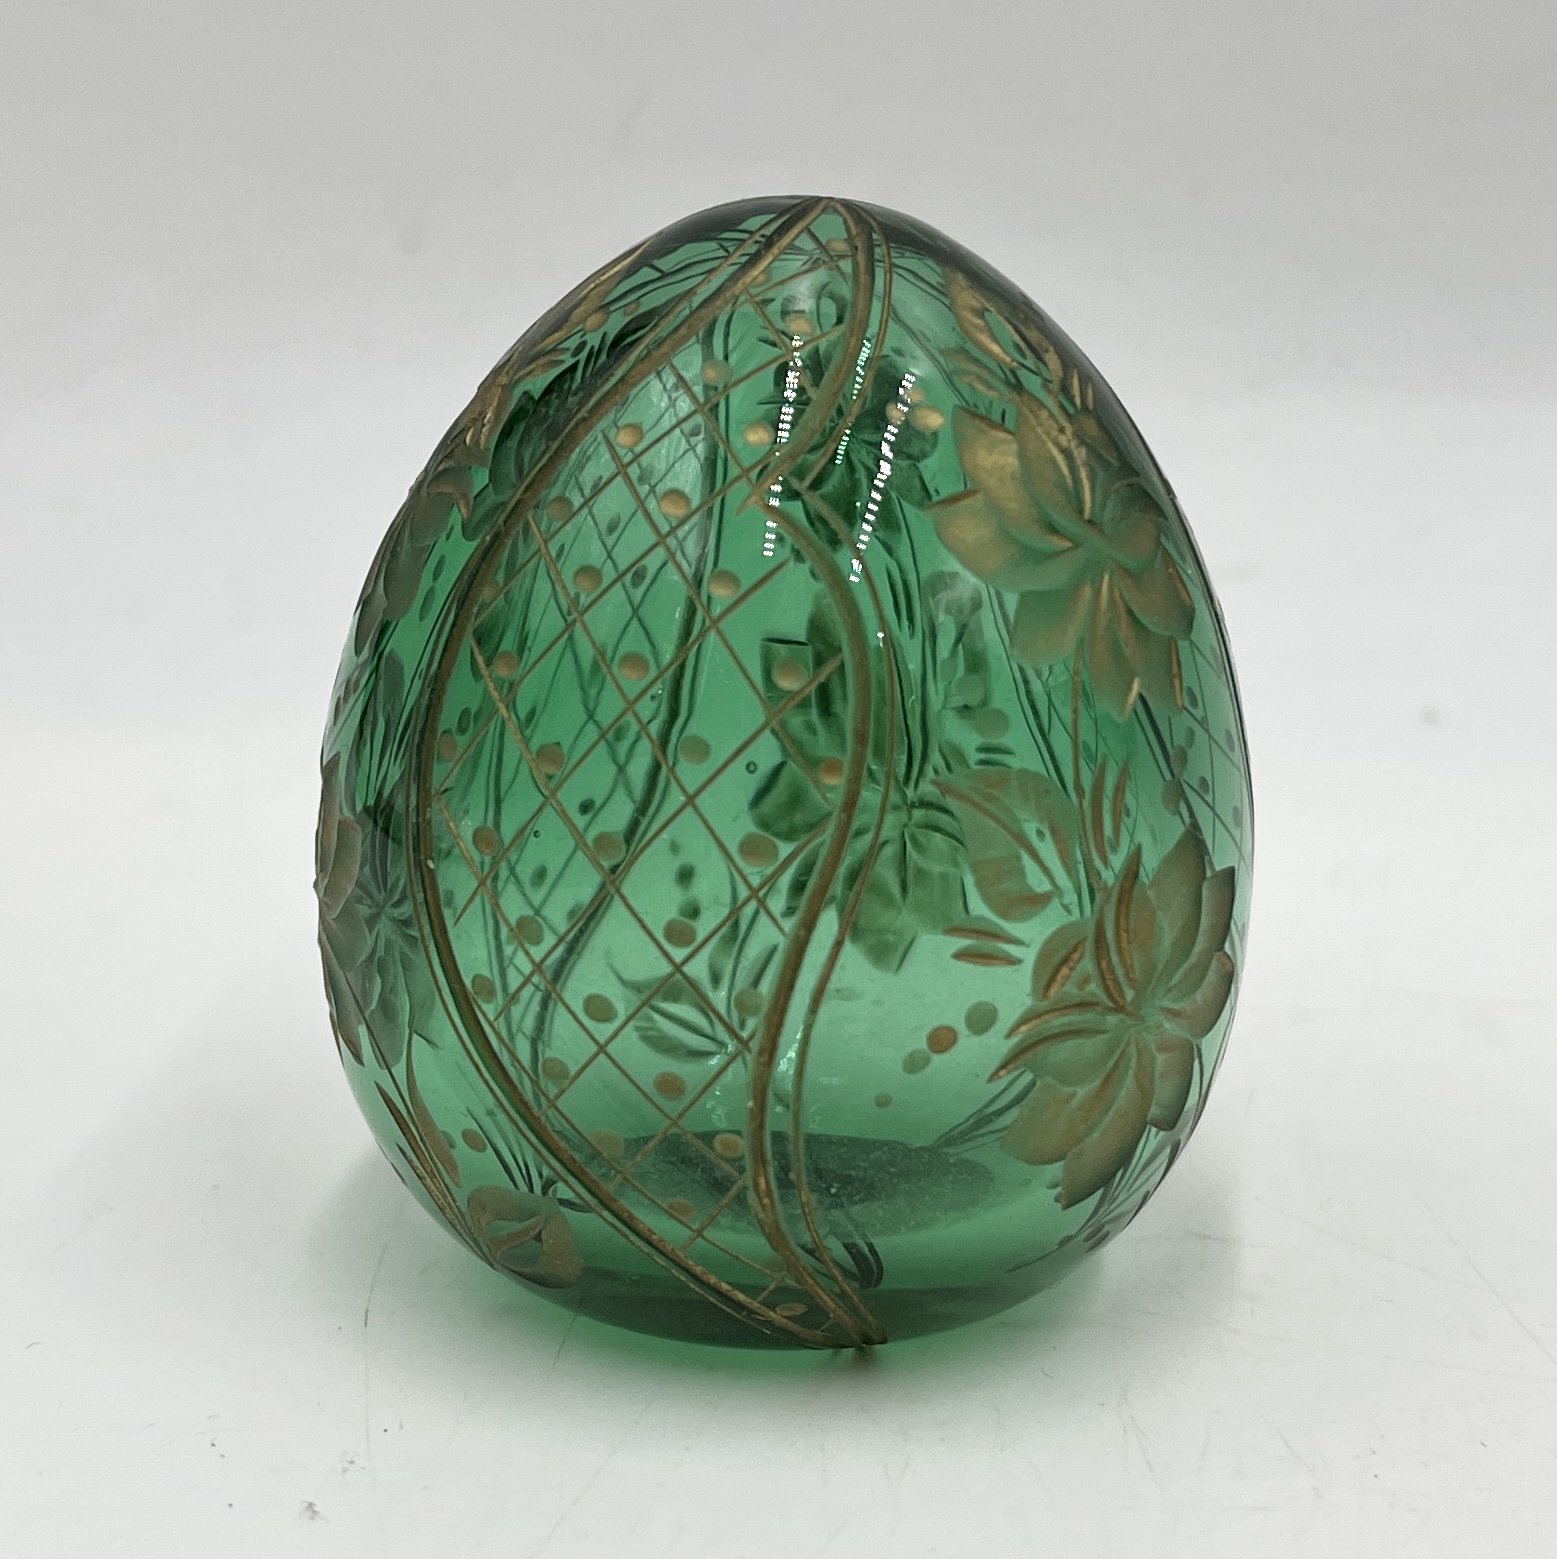 Faberge Modern egg in green glass with gilded detail, made in Russia - height approx. 5cm - Image 3 of 4